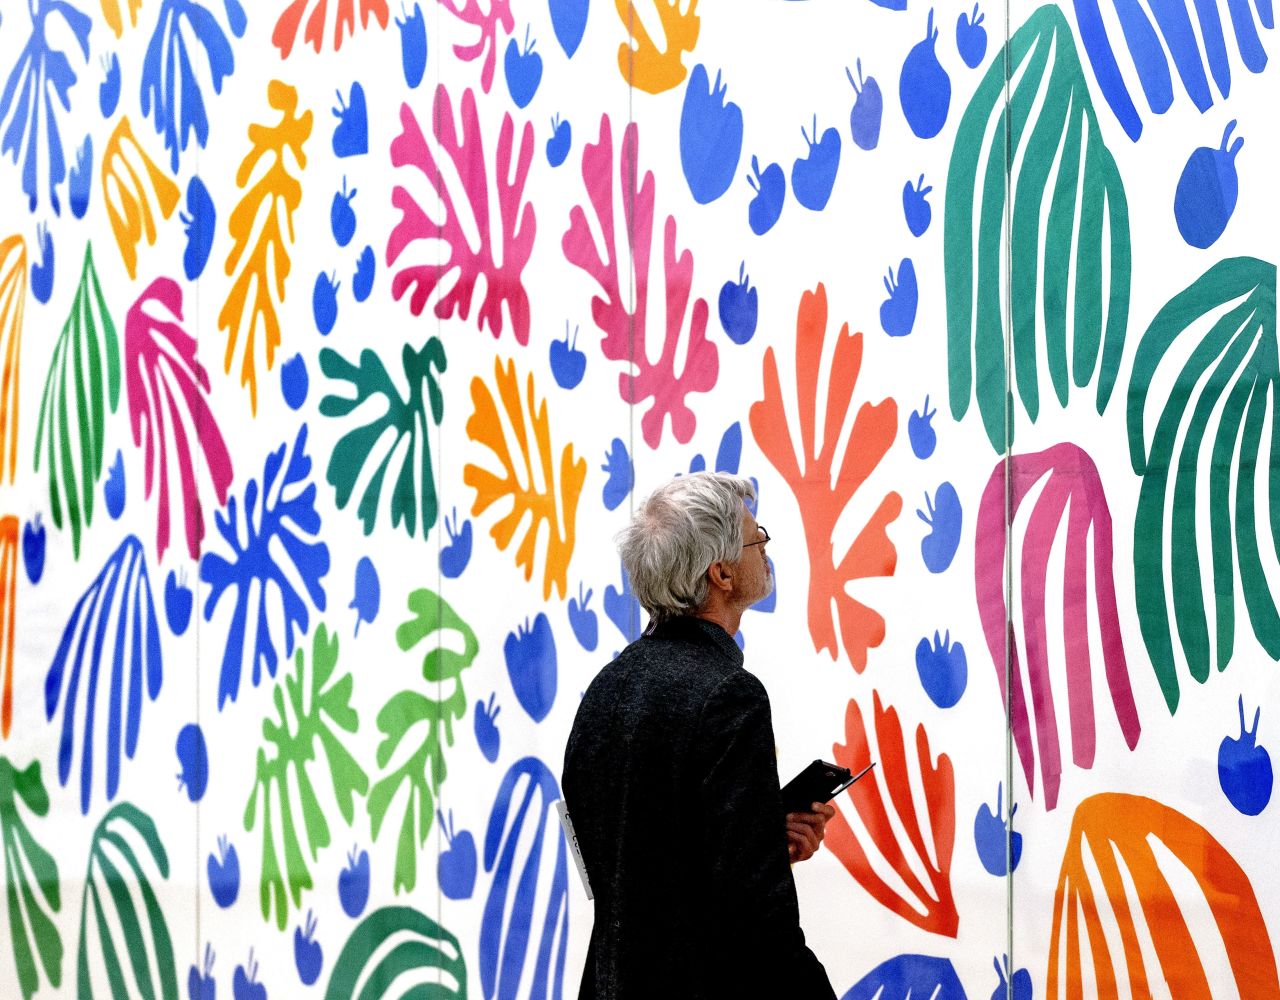 A visitor examines "La Perruche et la Sirene" by French artist Henri Matisse at the exhibition "De Oase van Matisse" at the Stedelijk Museum Amsterdam in 2015. 